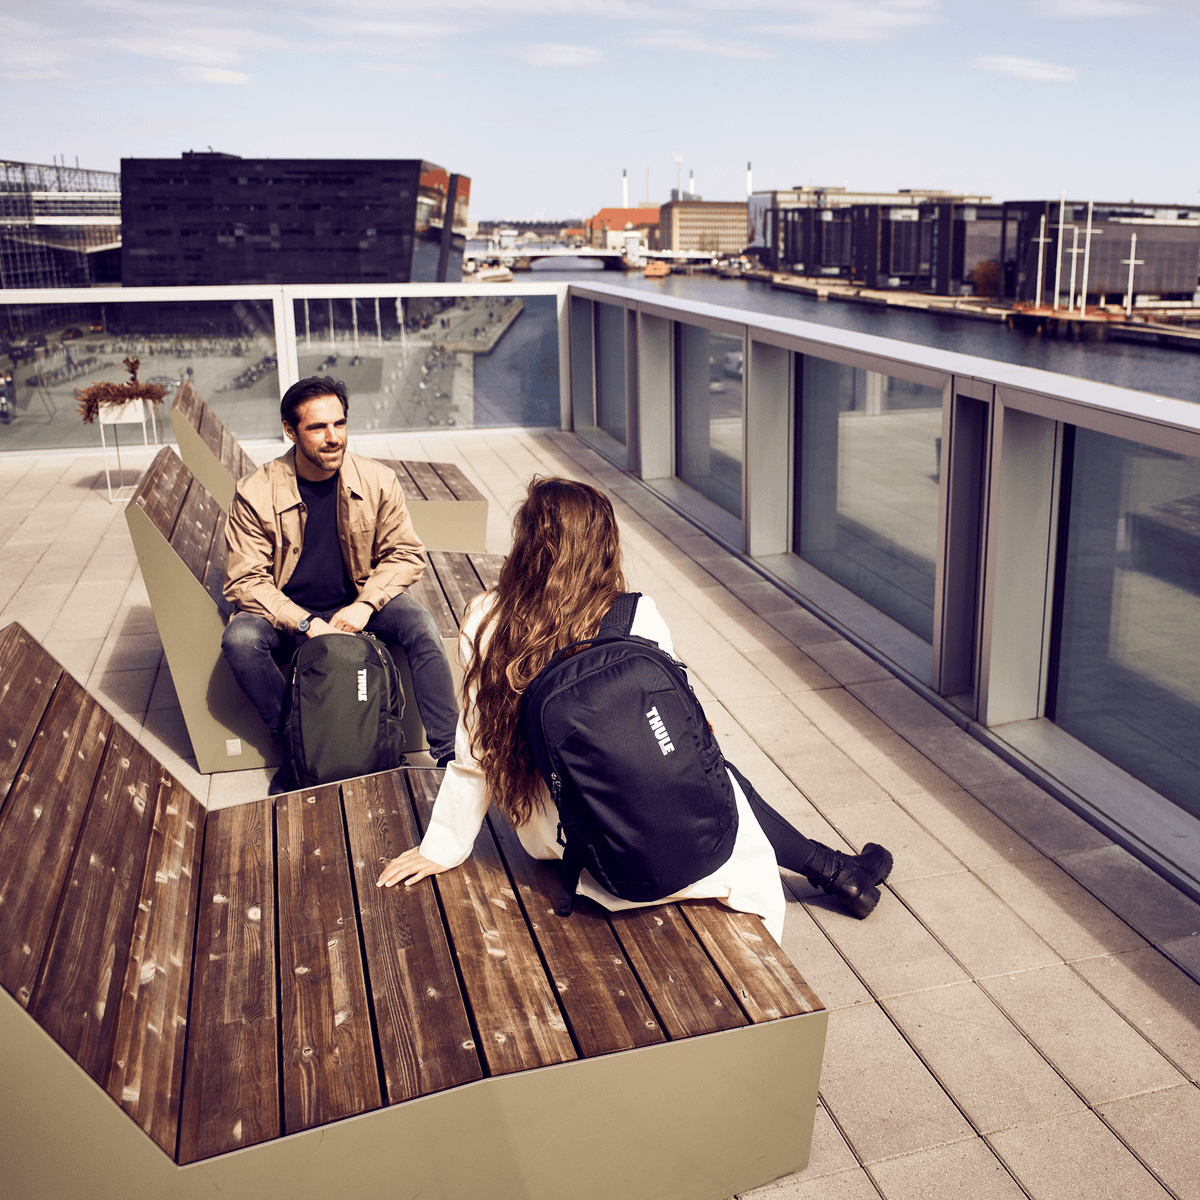 On a terrace overlooking the city, two people sit on a bench talking with Thule Subterra backpacks.